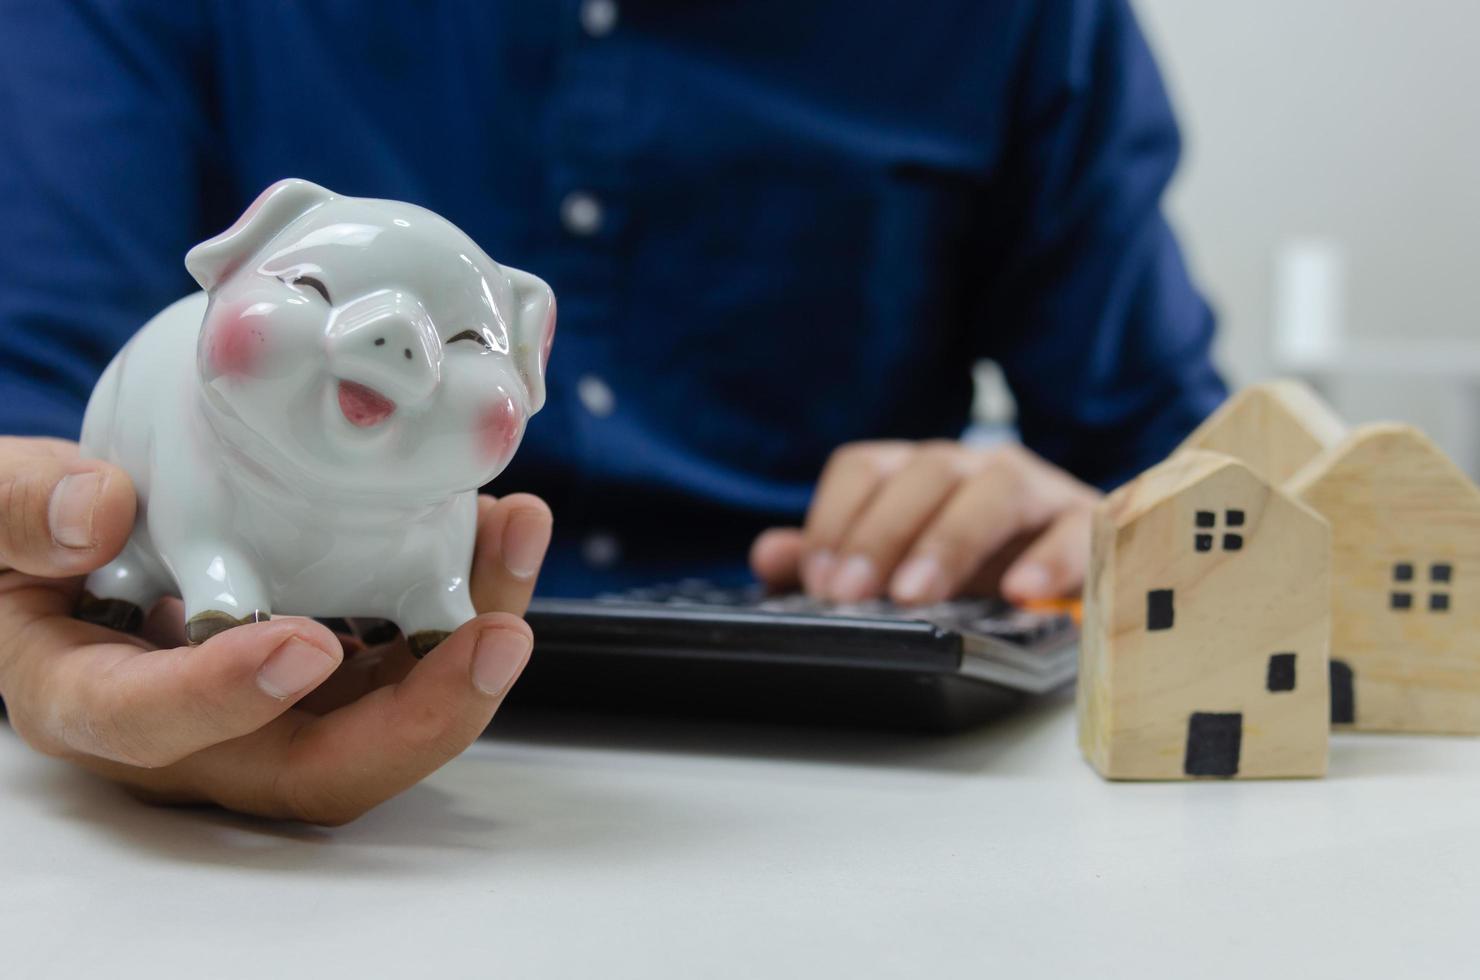 Saving a piggy bank for real estate and housing purchases. Business finance investments taxes or retirement money and concept insurance. photo